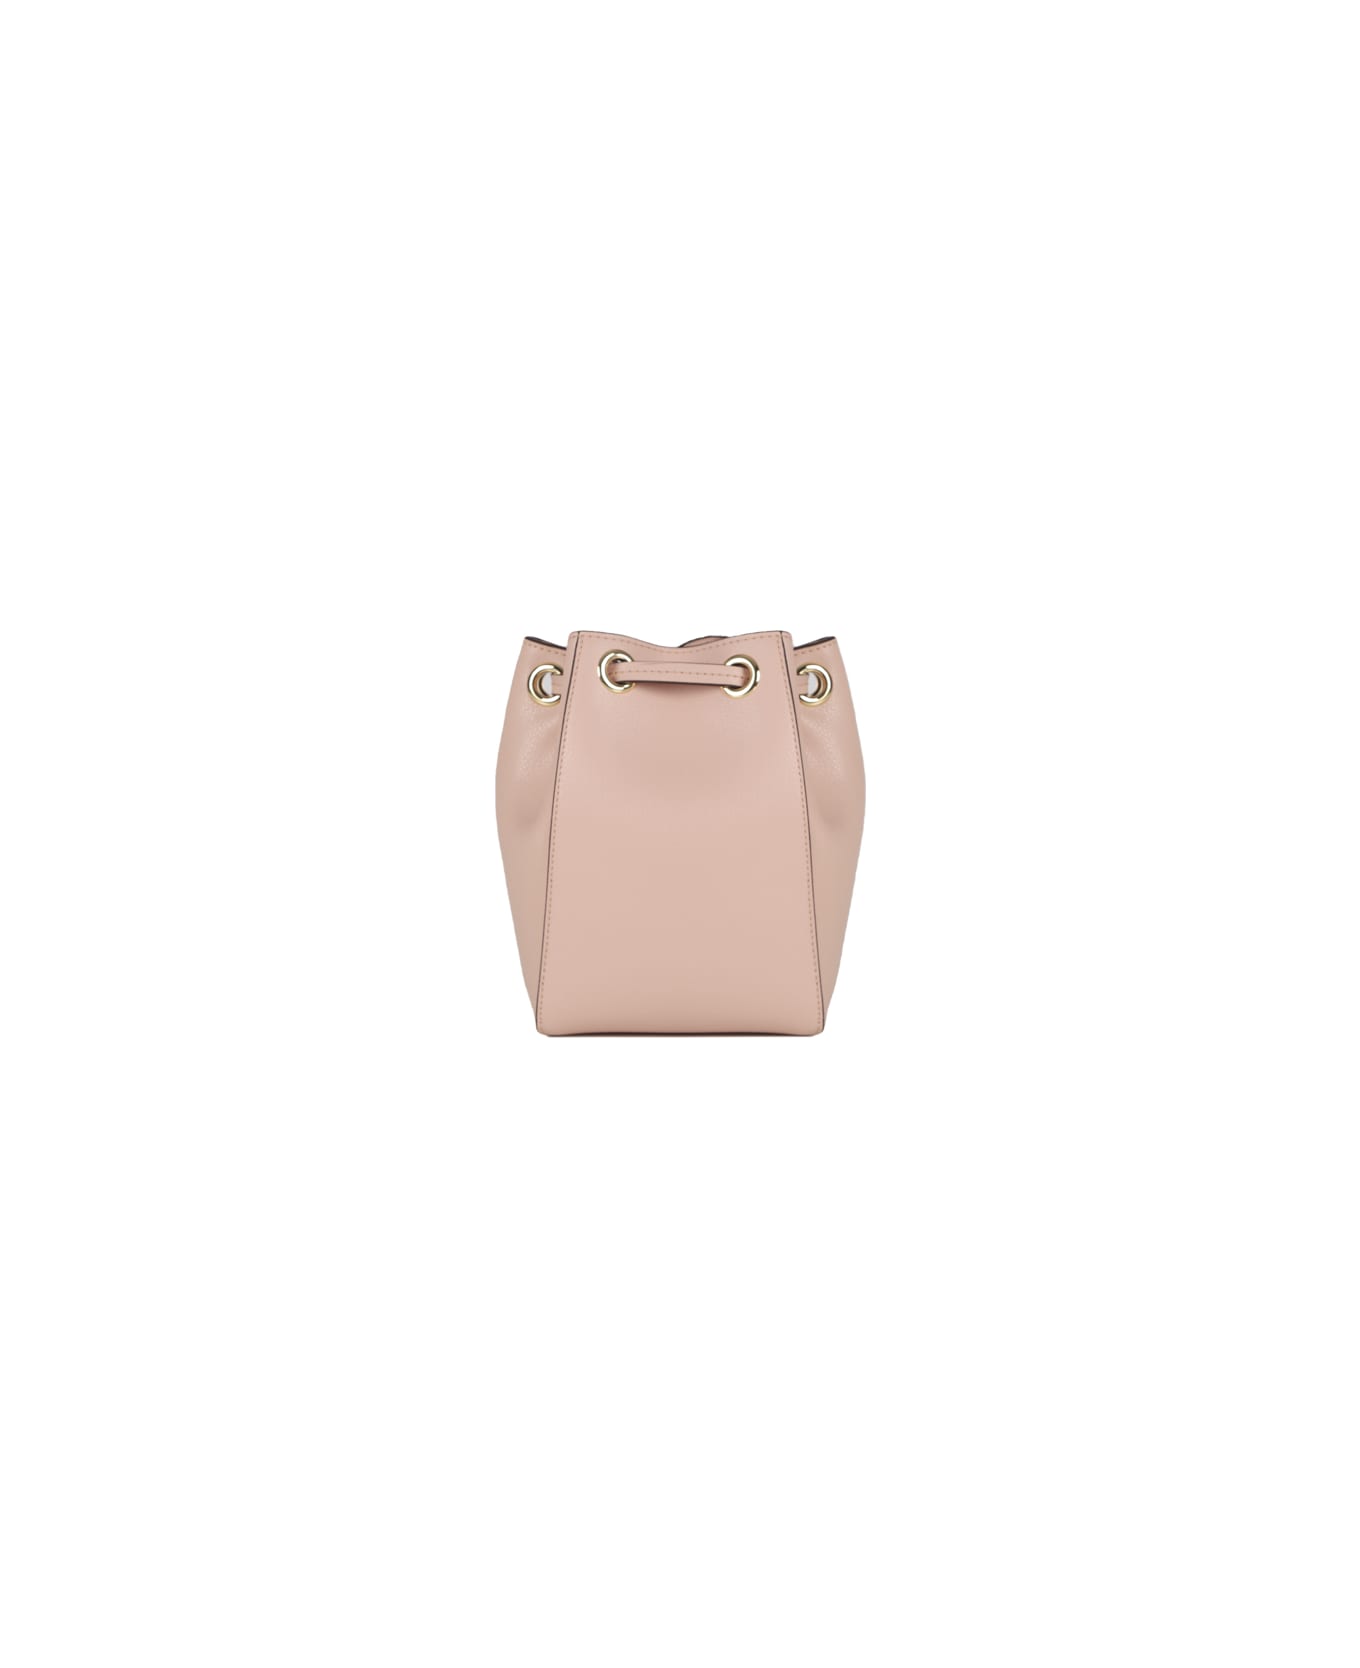 Marc Jacobs The Bucket Bag - Rose pink